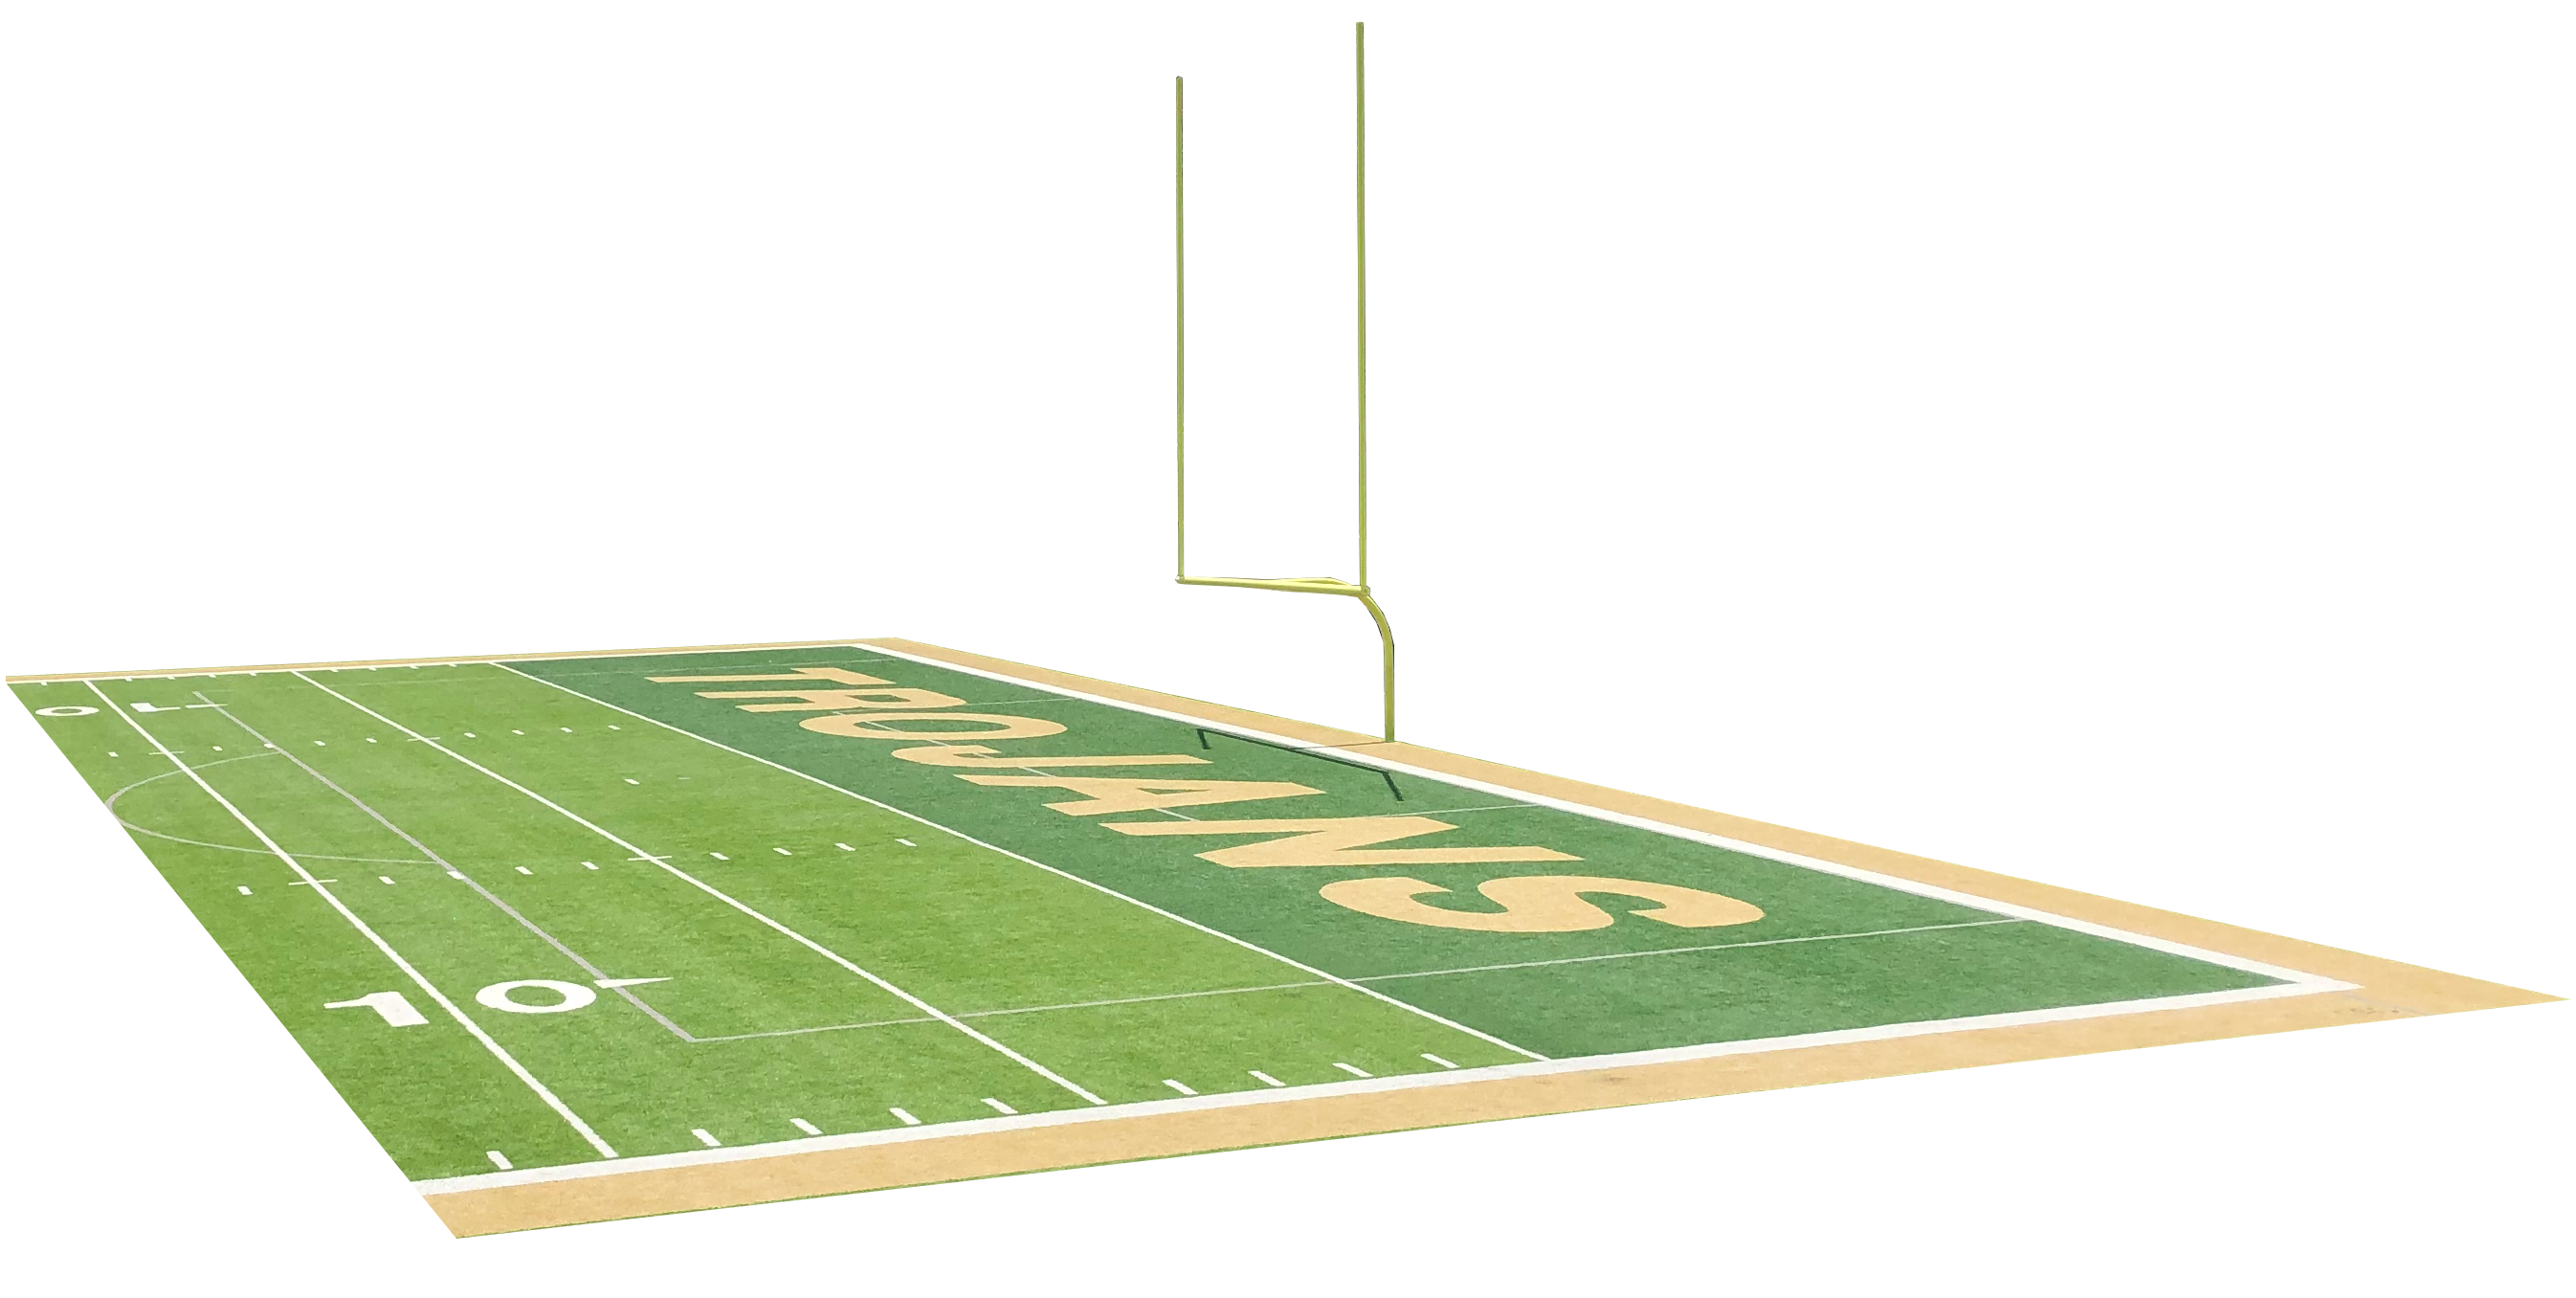 Picture of the endzone of a football field